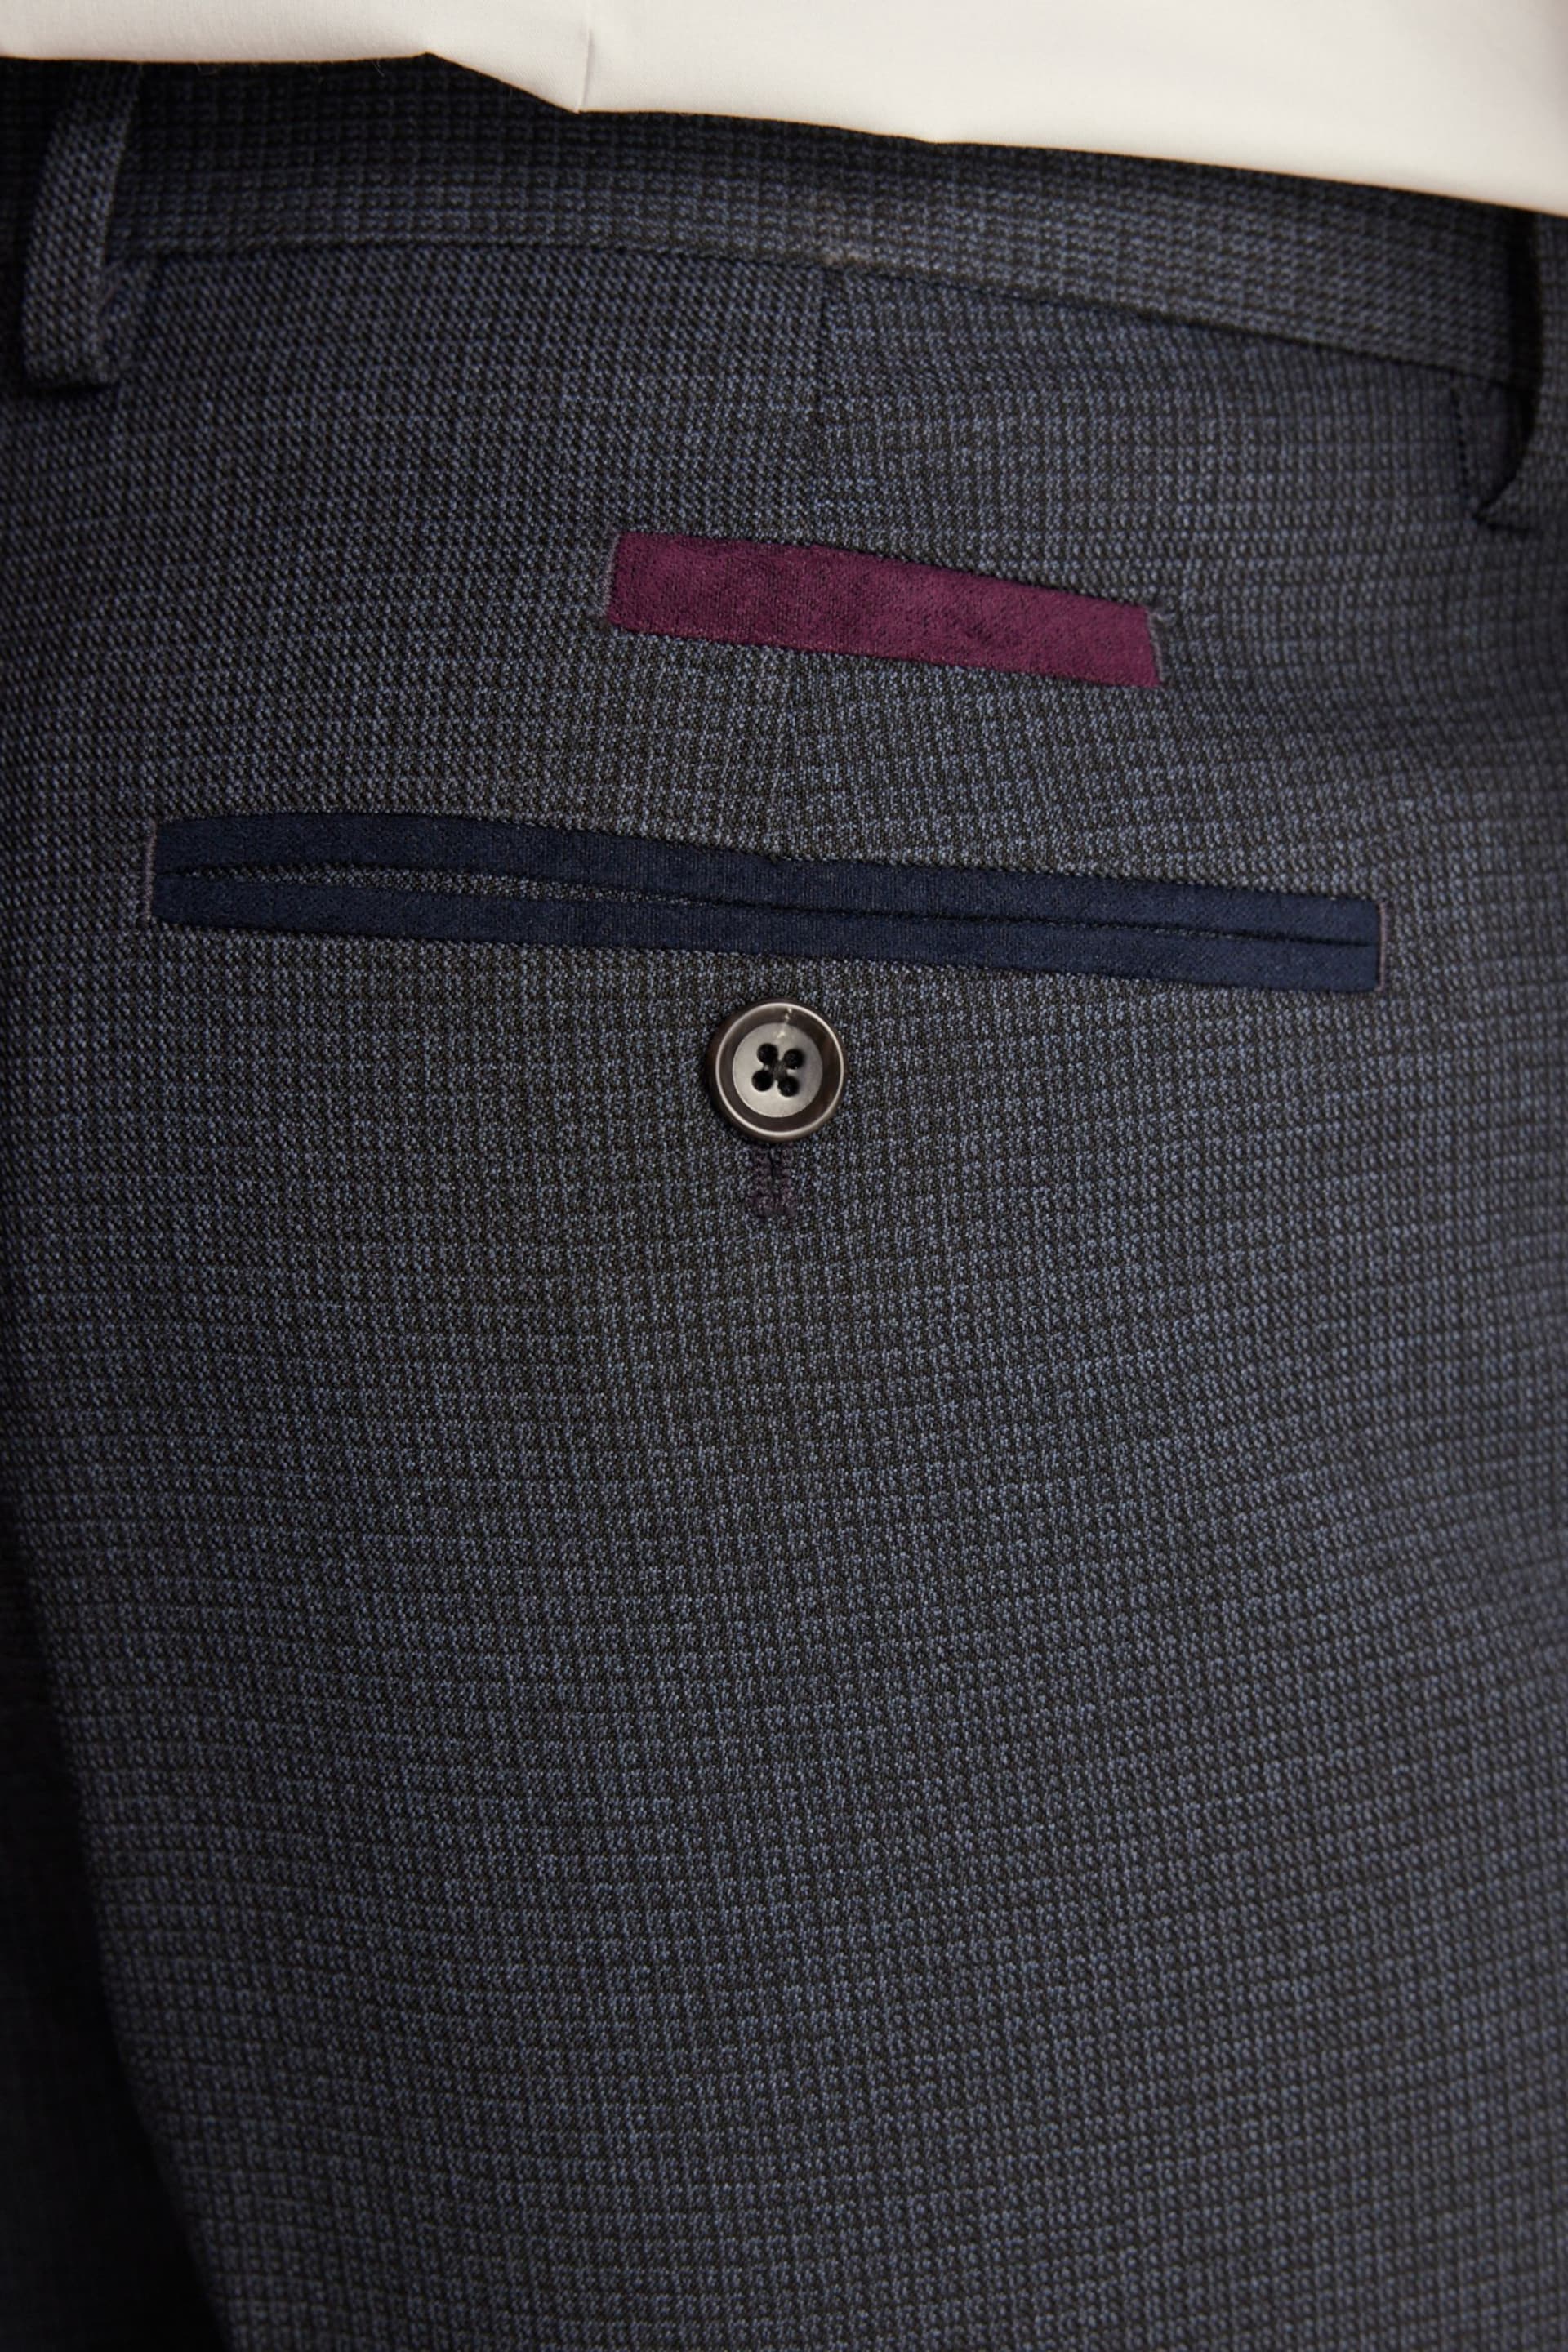 Navy Trimmed Textured Suit Trousers - Image 5 of 9